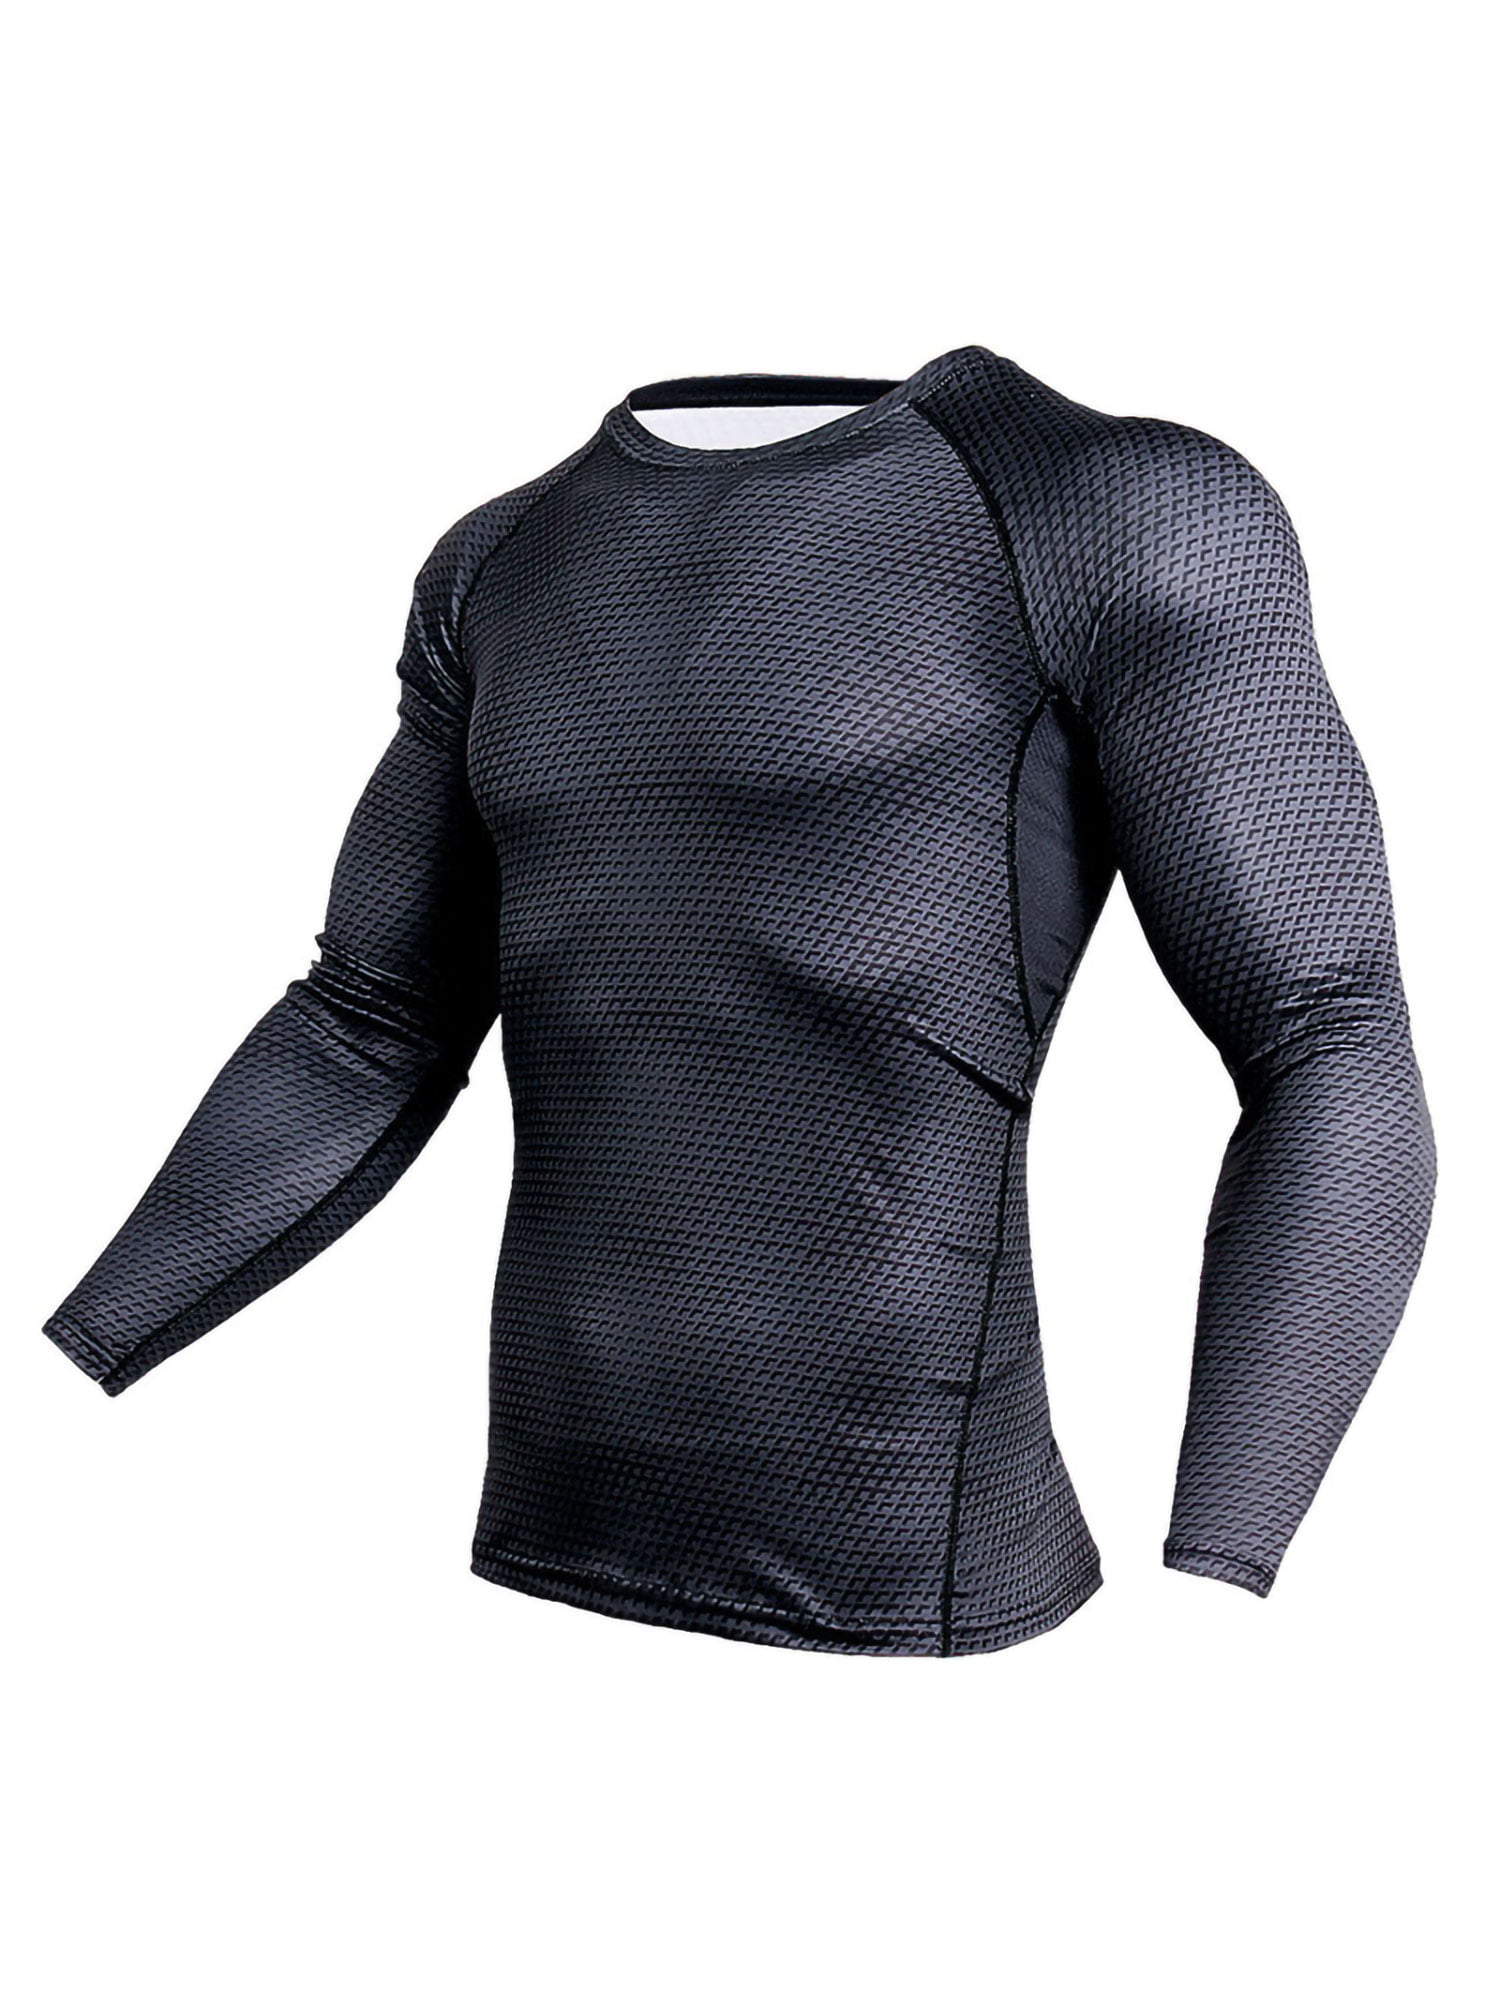 Details about   Mens Compression Under Baselayer Sports Basketball Slimming Shirt Sports Gym Top 